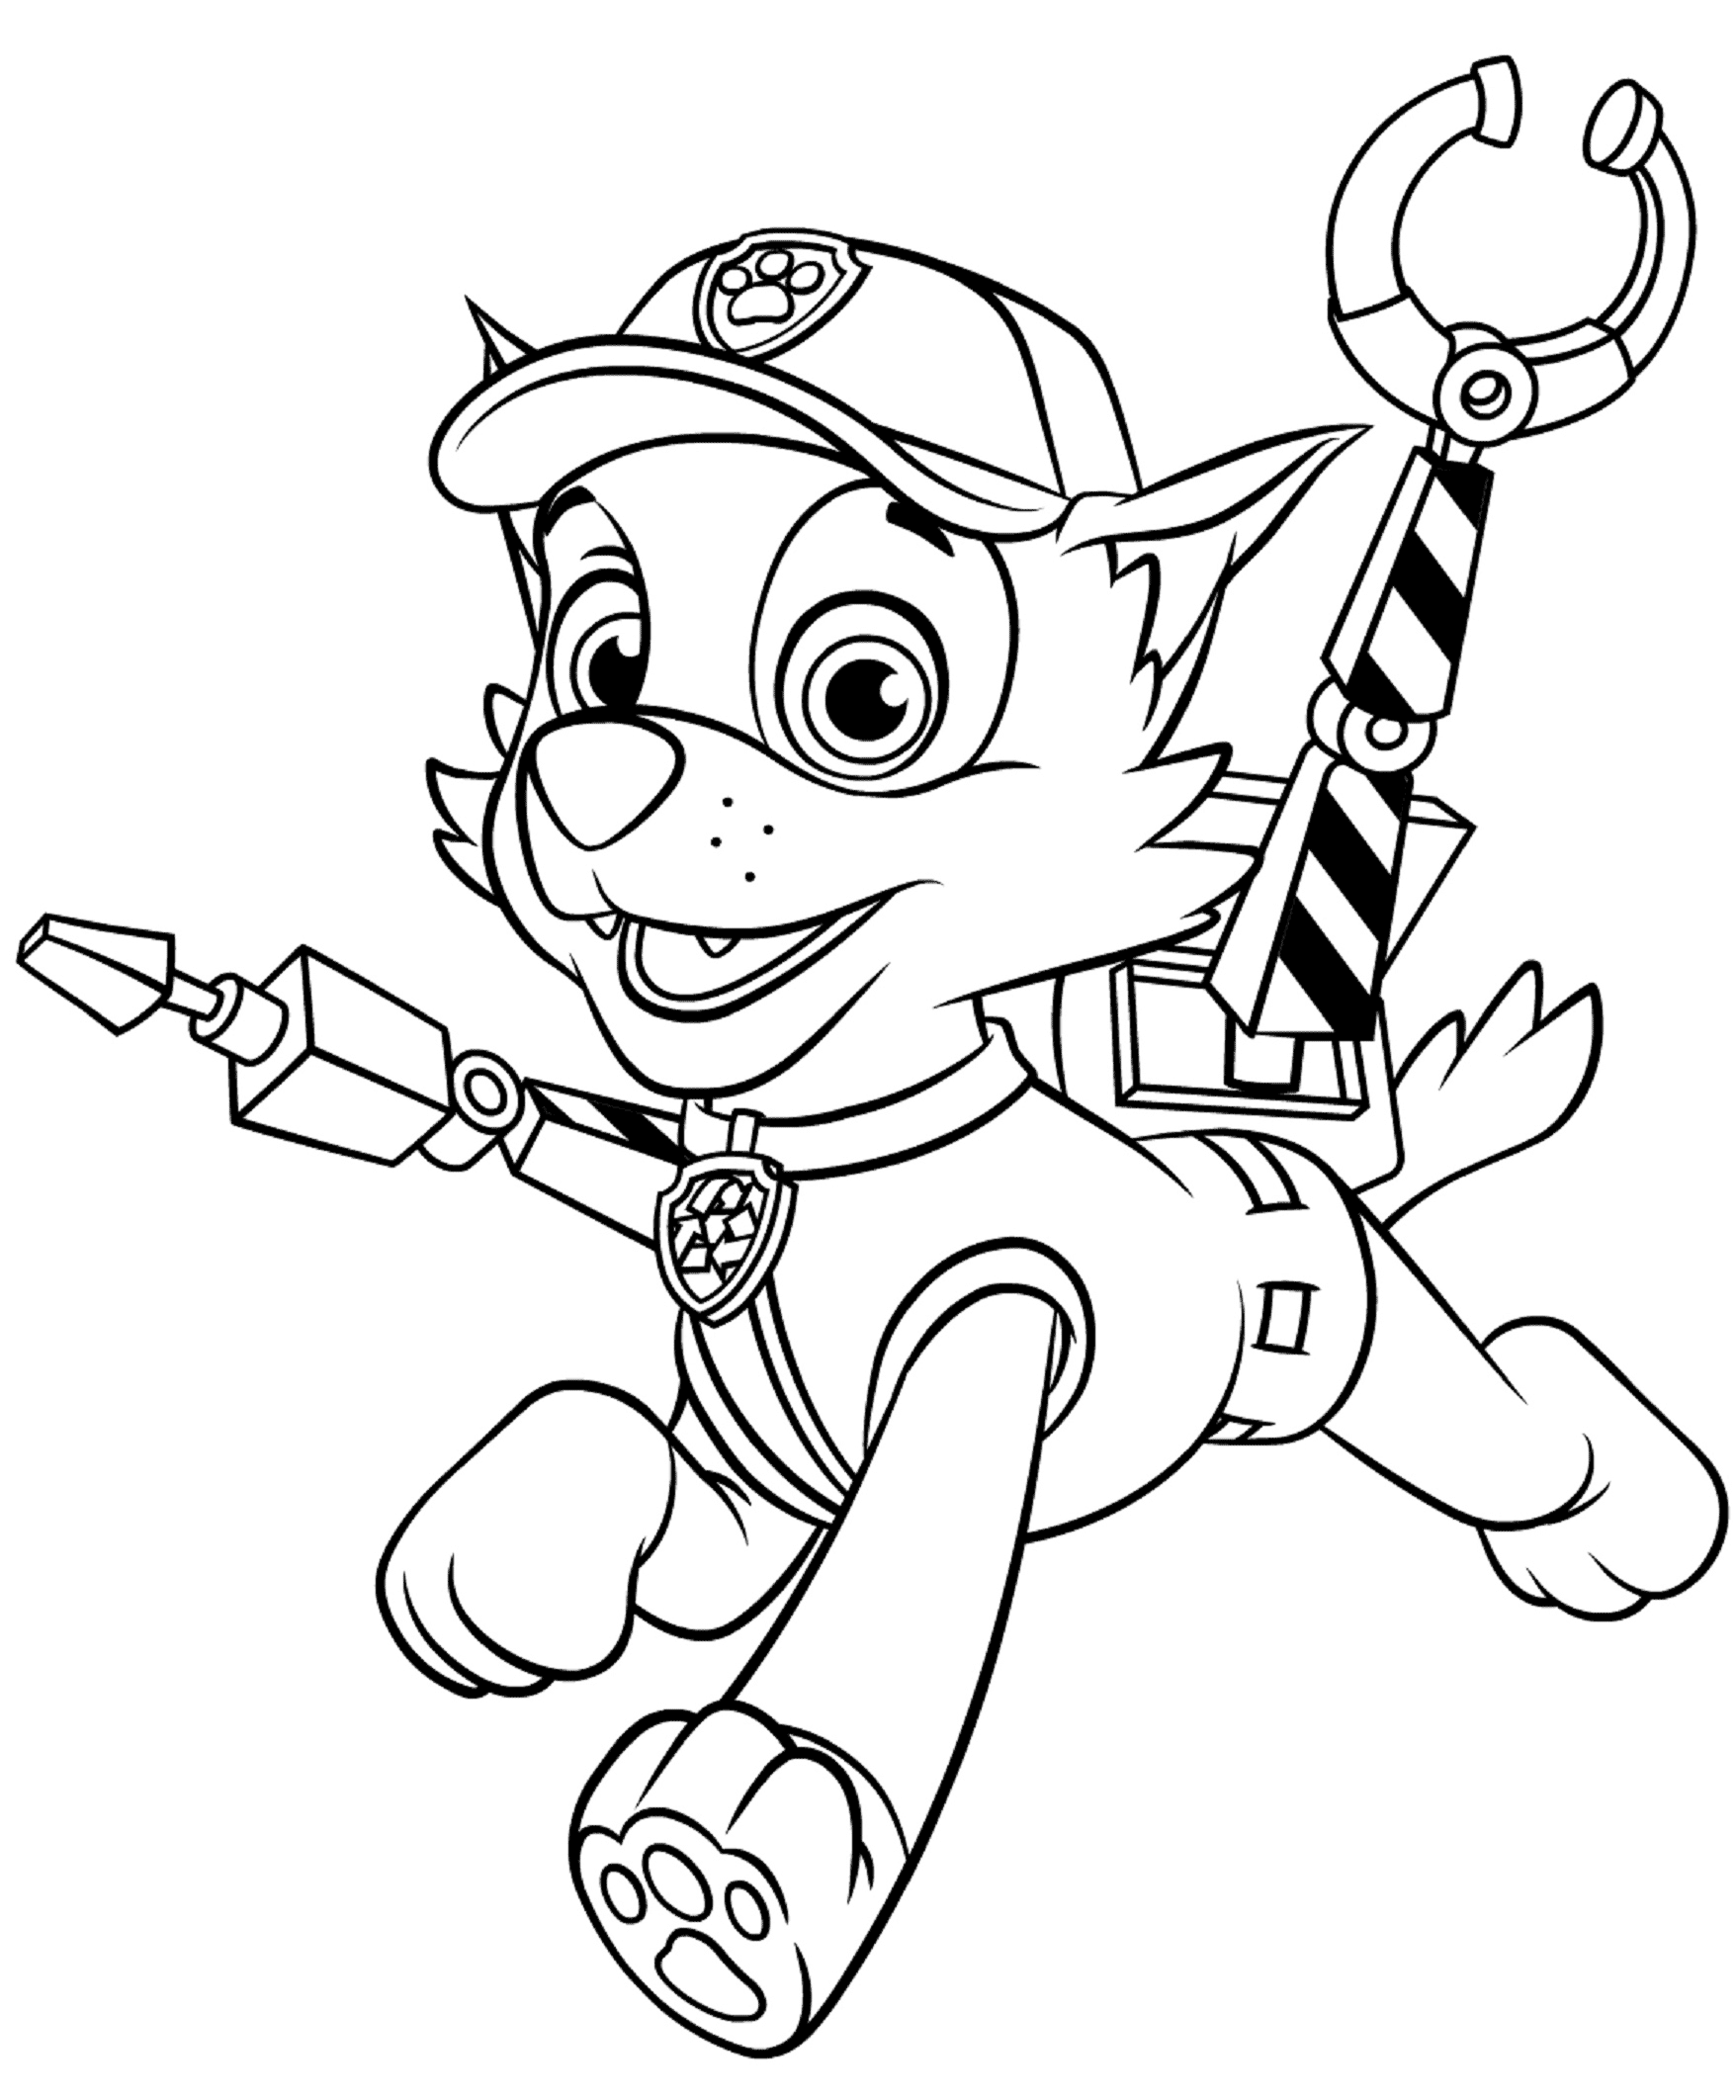 Rocky With Claws Paw Patrol Coloring Page